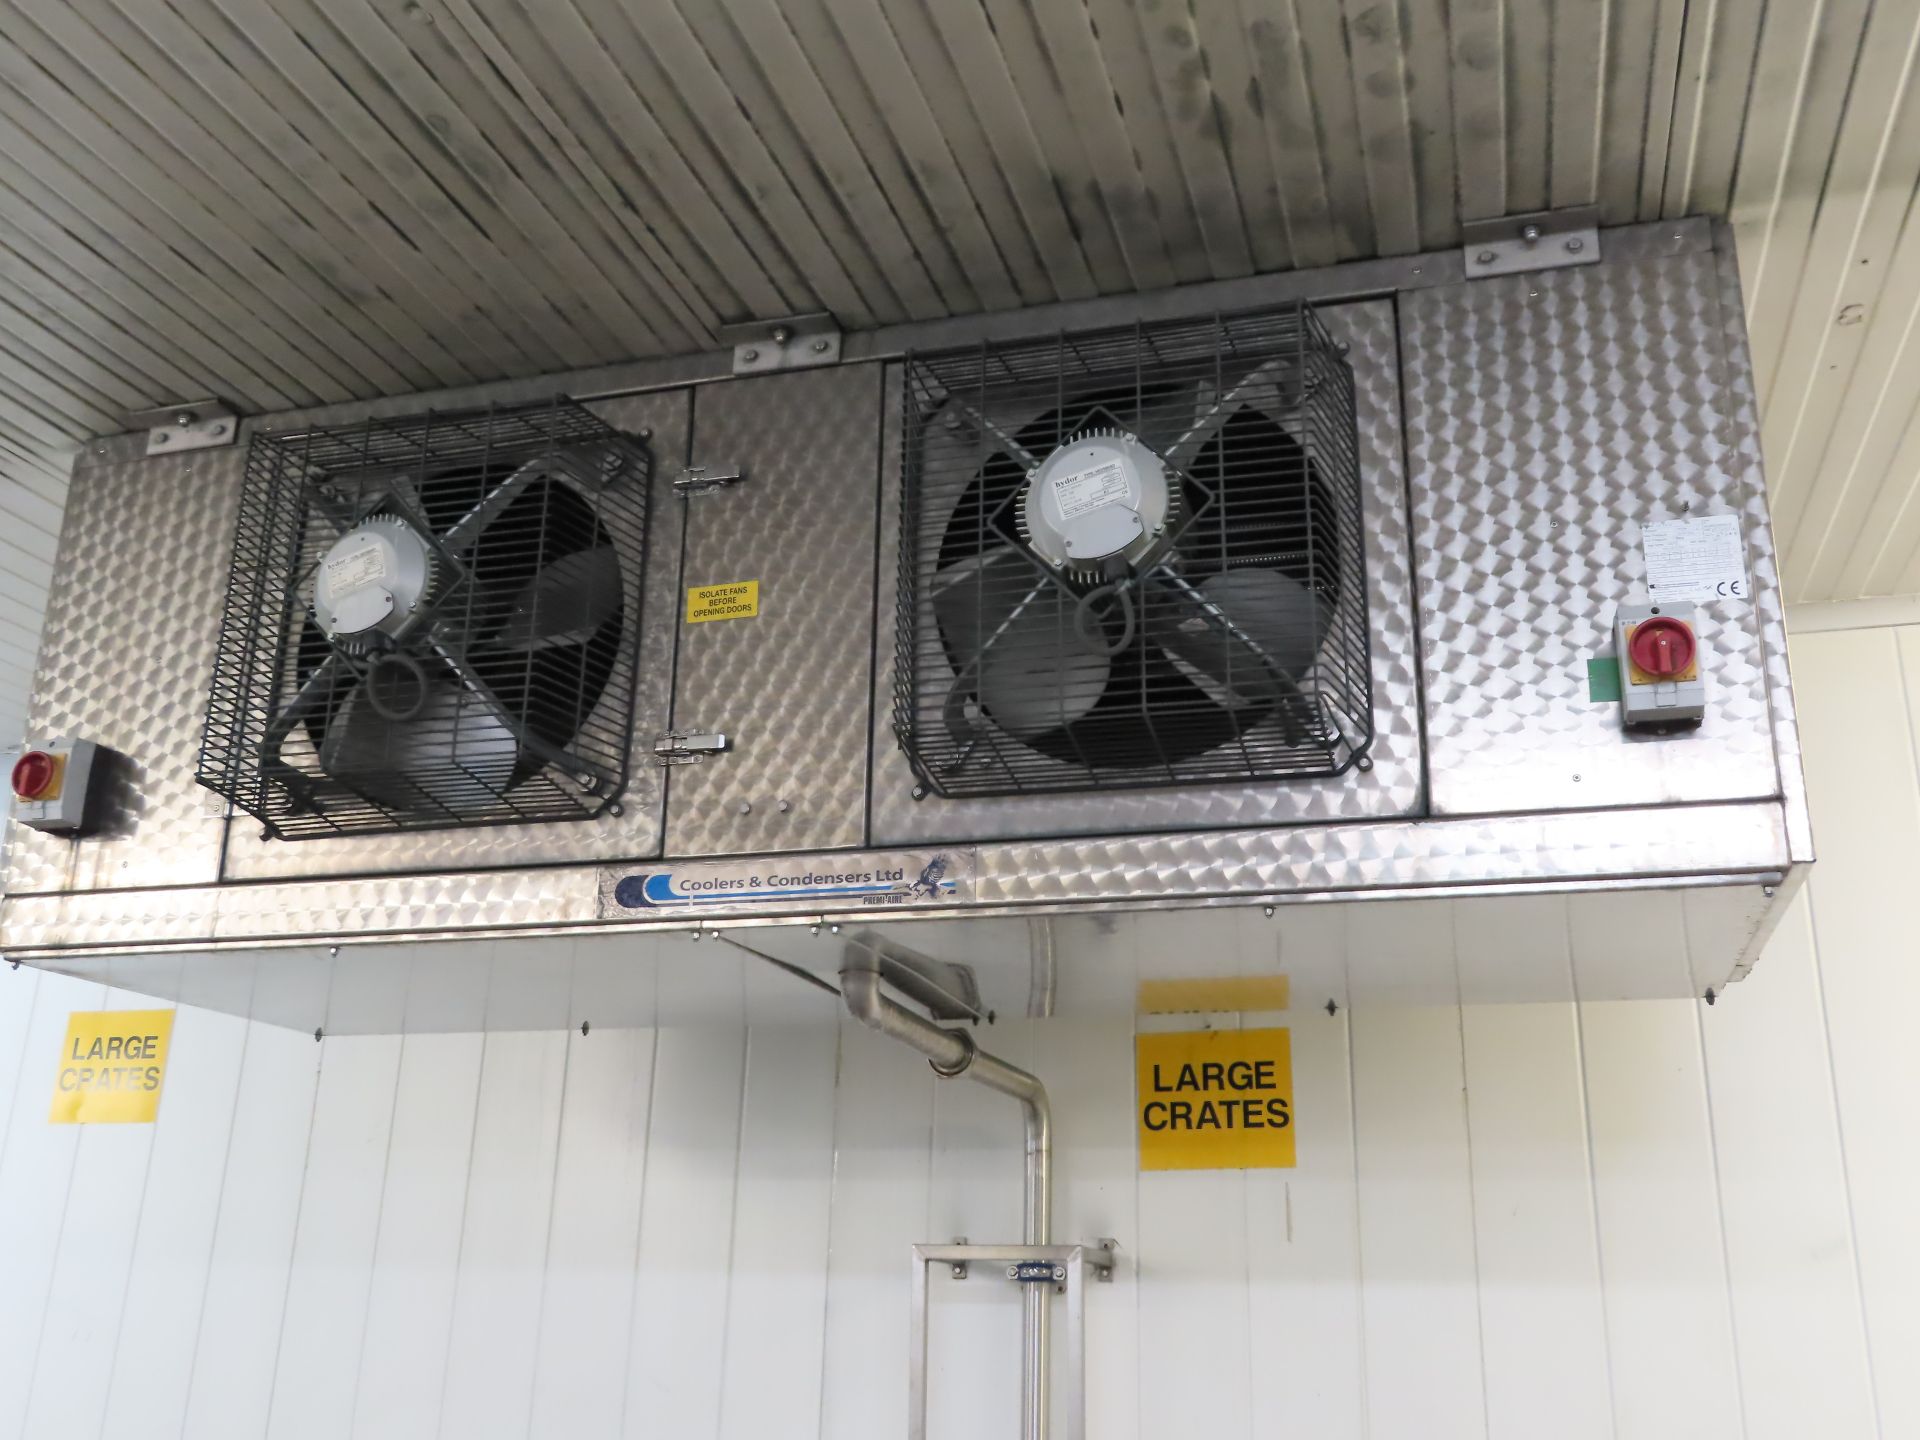 3 X COOLERS & CONDENSERS 2-FAN EVAORATORS. - Image 3 of 4